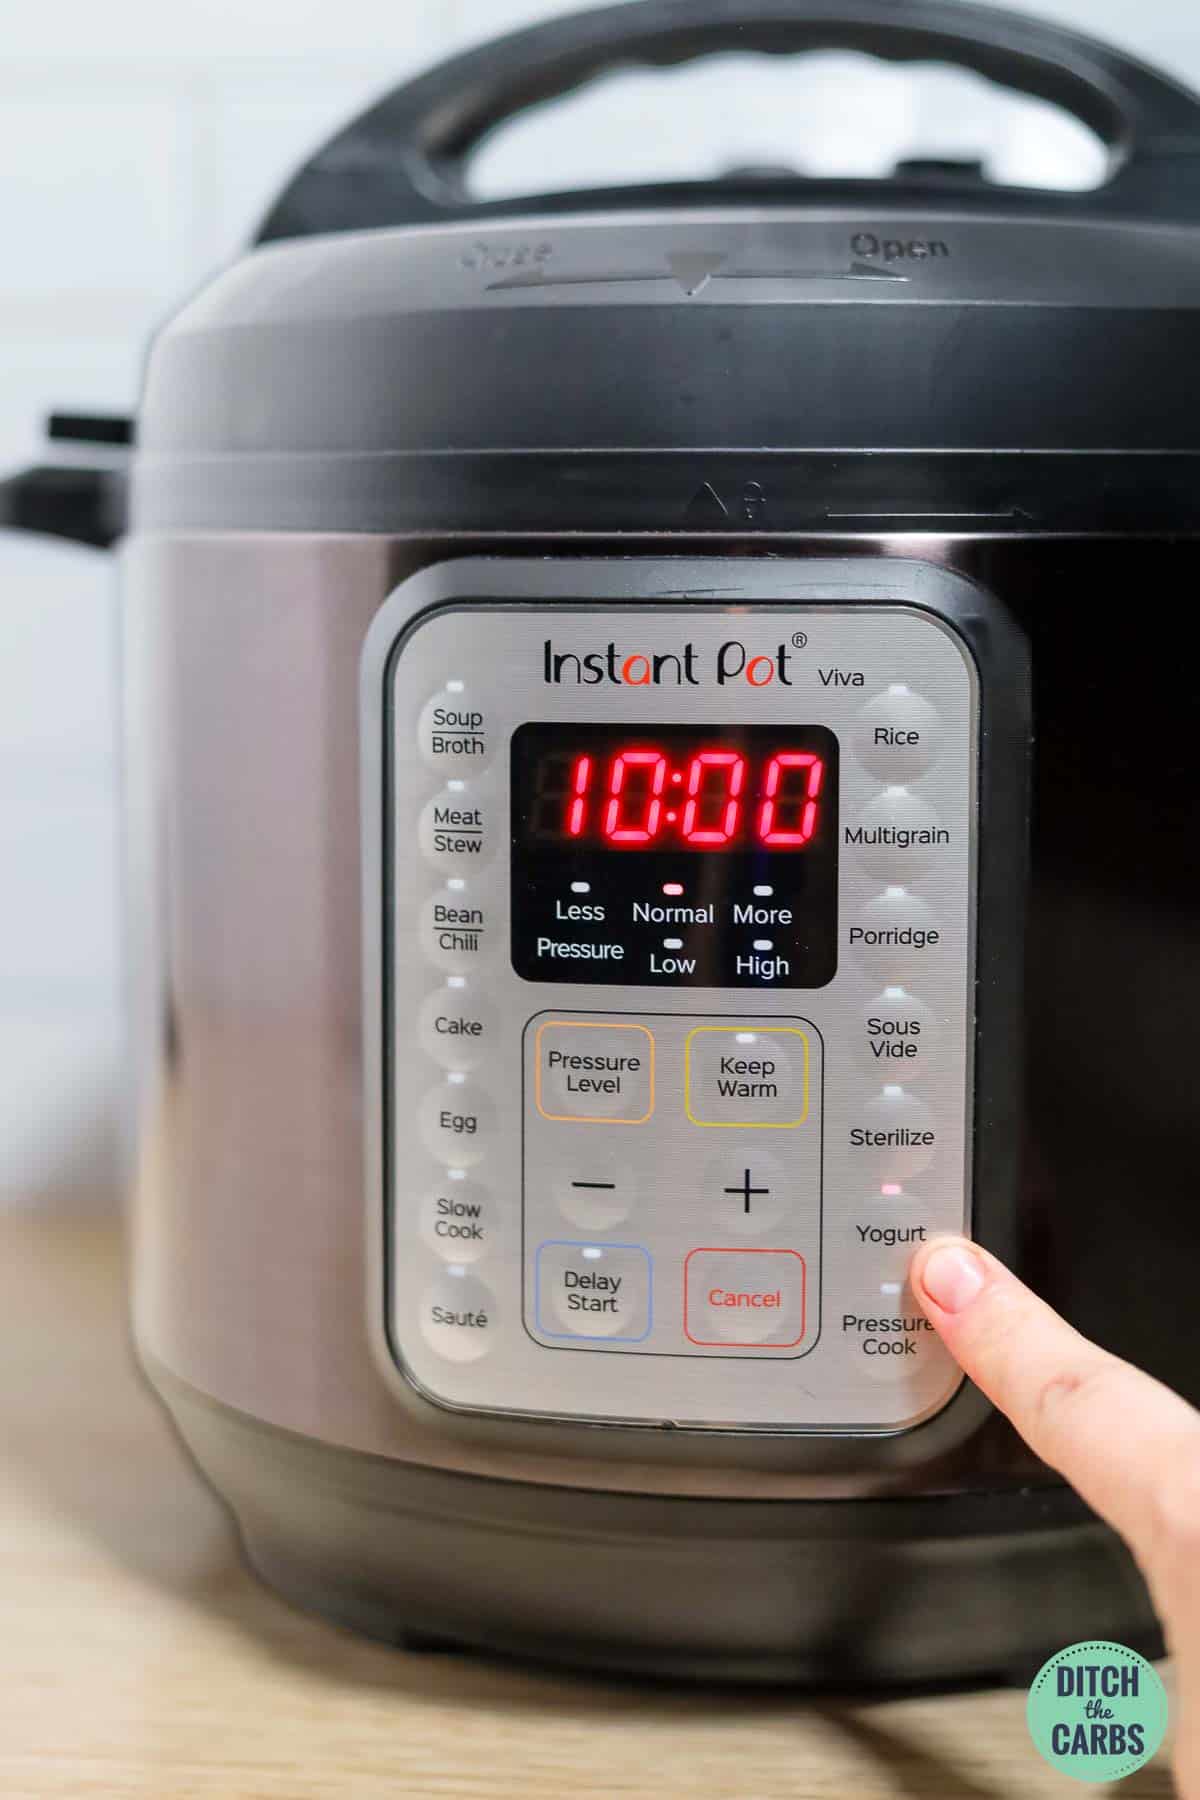 Setting the timer on the Instant Pot to incubate the yogurt using the yogurt setting.